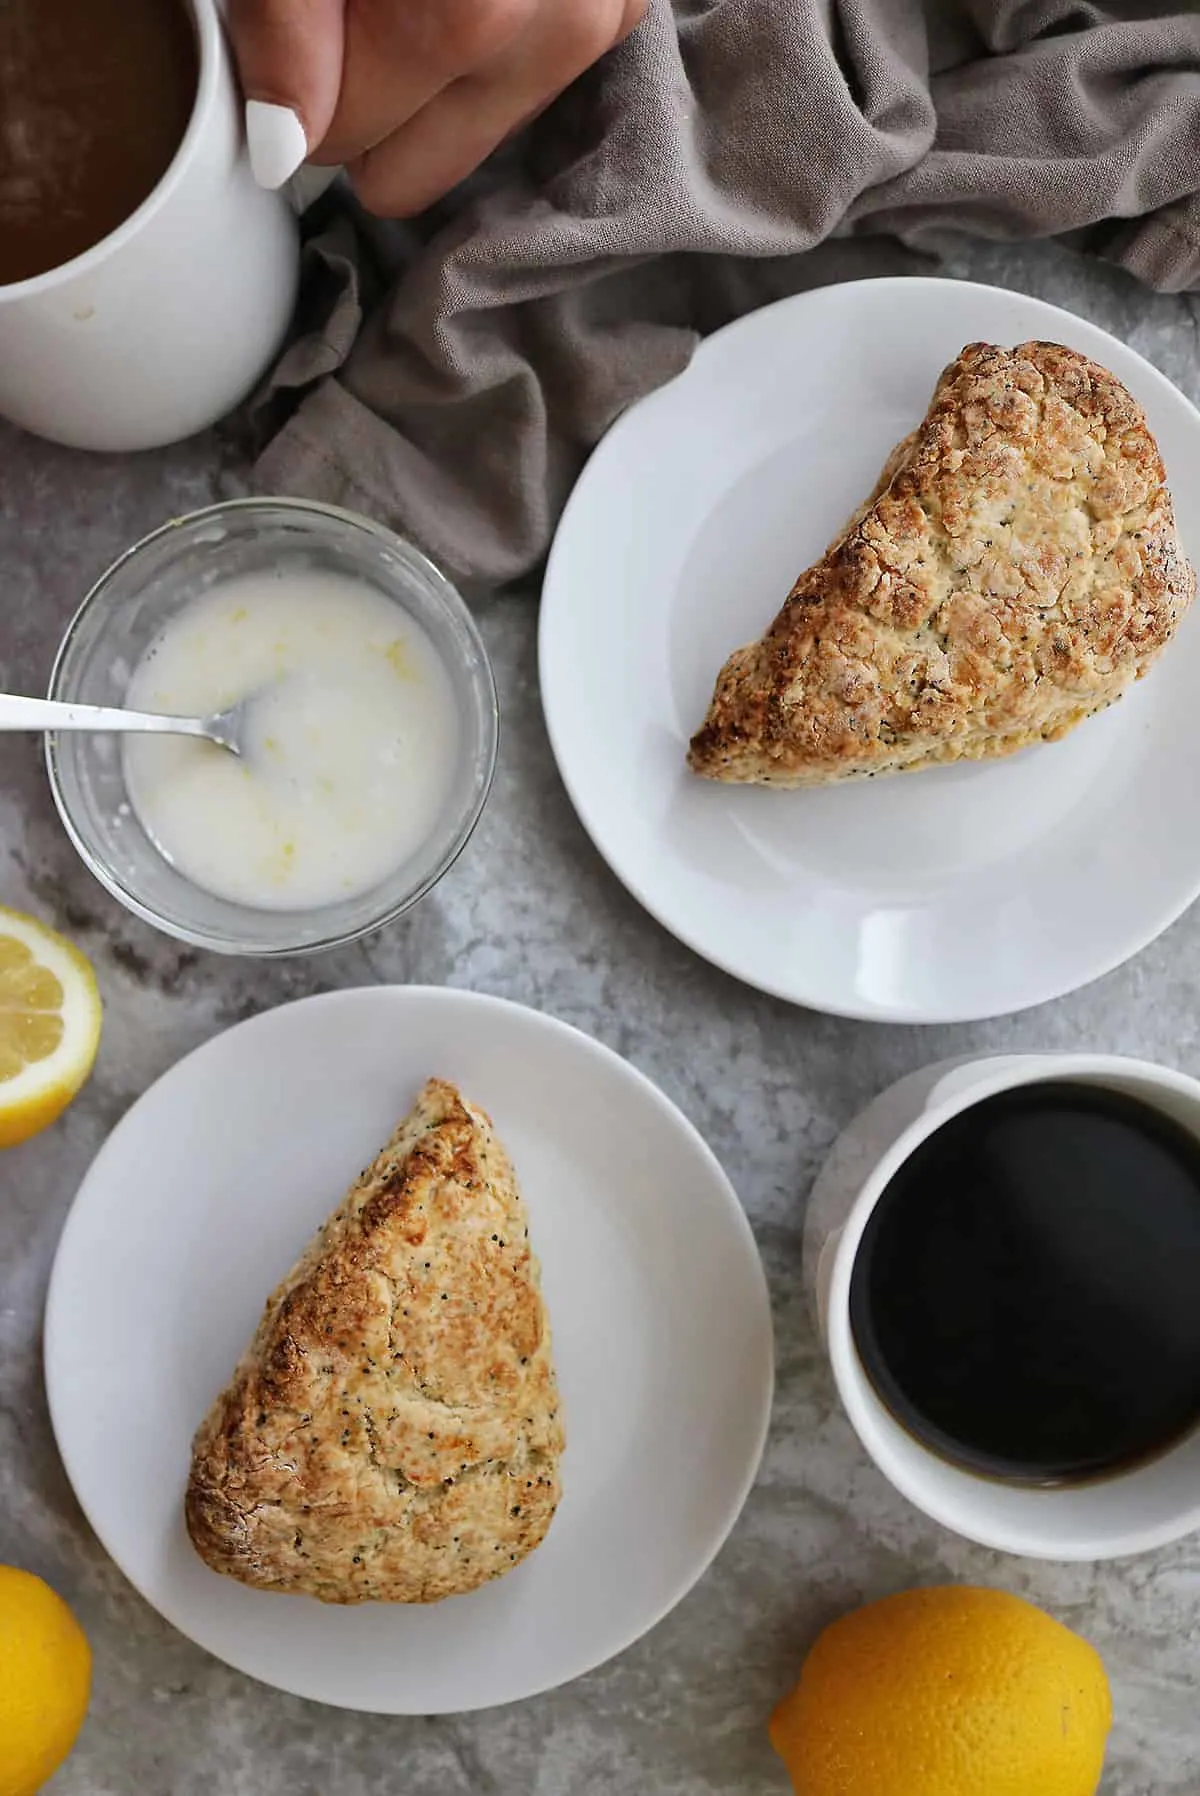 Gluten Free Lemon Poppyseed Scones are safe for everyone to eat. They're even made lactose-free!